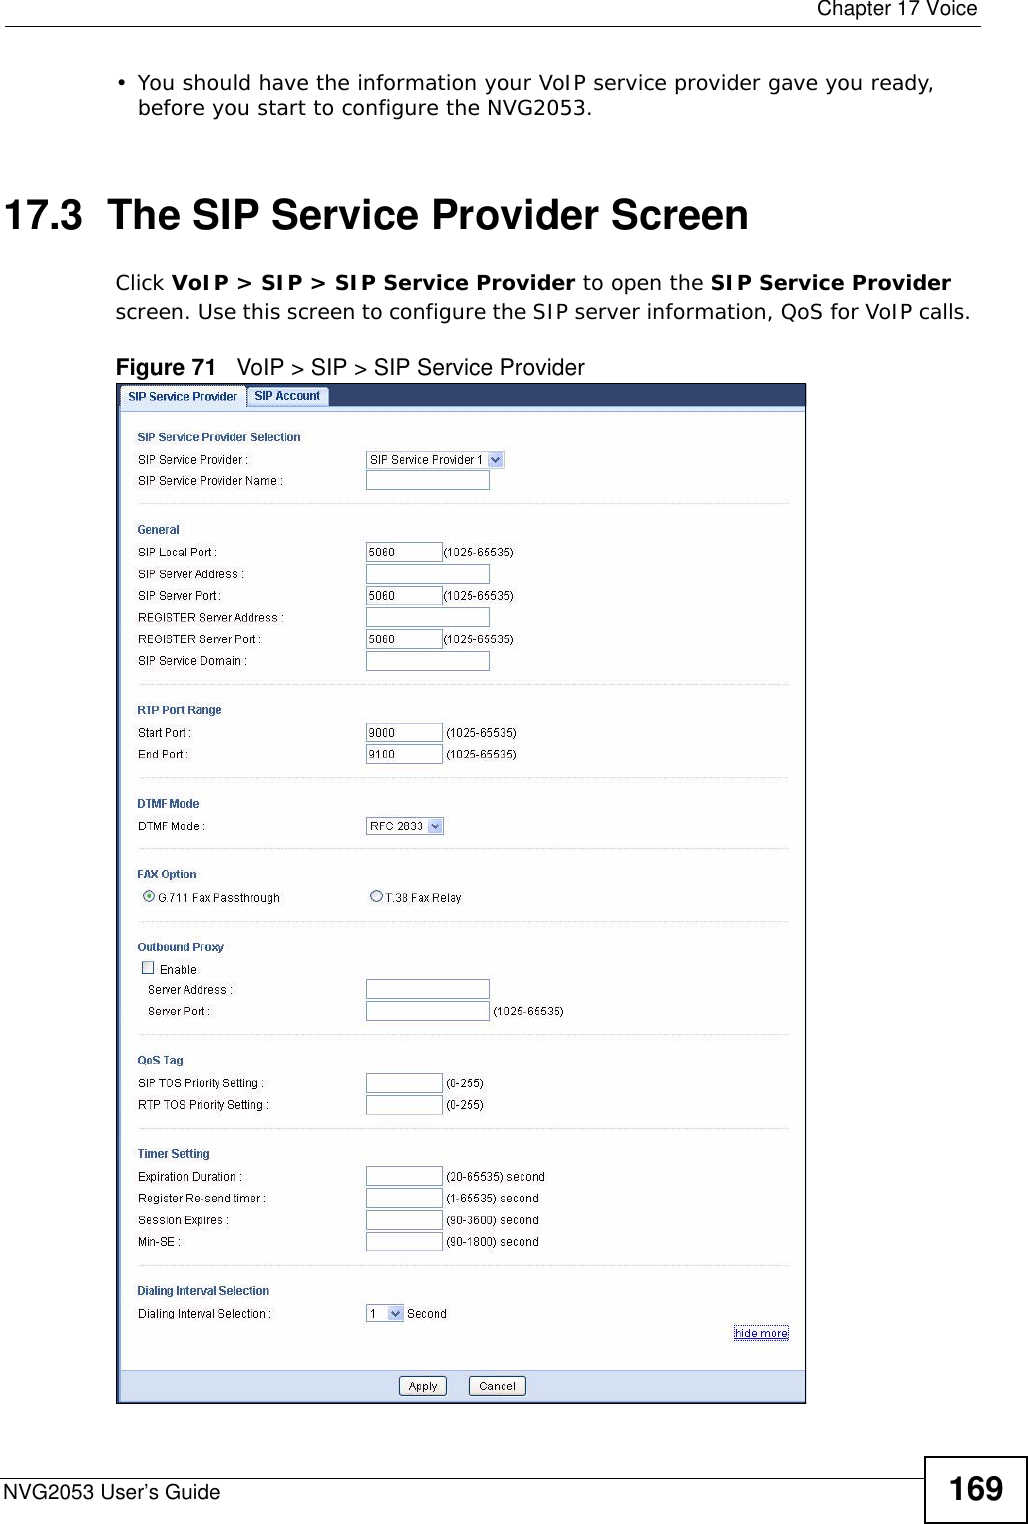  Chapter 17 VoiceNVG2053 User’s Guide 169• You should have the information your VoIP service provider gave you ready, before you start to configure the NVG2053.17.3  The SIP Service Provider Screen Click VoIP &gt; SIP &gt; SIP Service Provider to open the SIP Service Provider screen. Use this screen to configure the SIP server information, QoS for VoIP calls. Figure 71   VoIP &gt; SIP &gt; SIP Service Provider